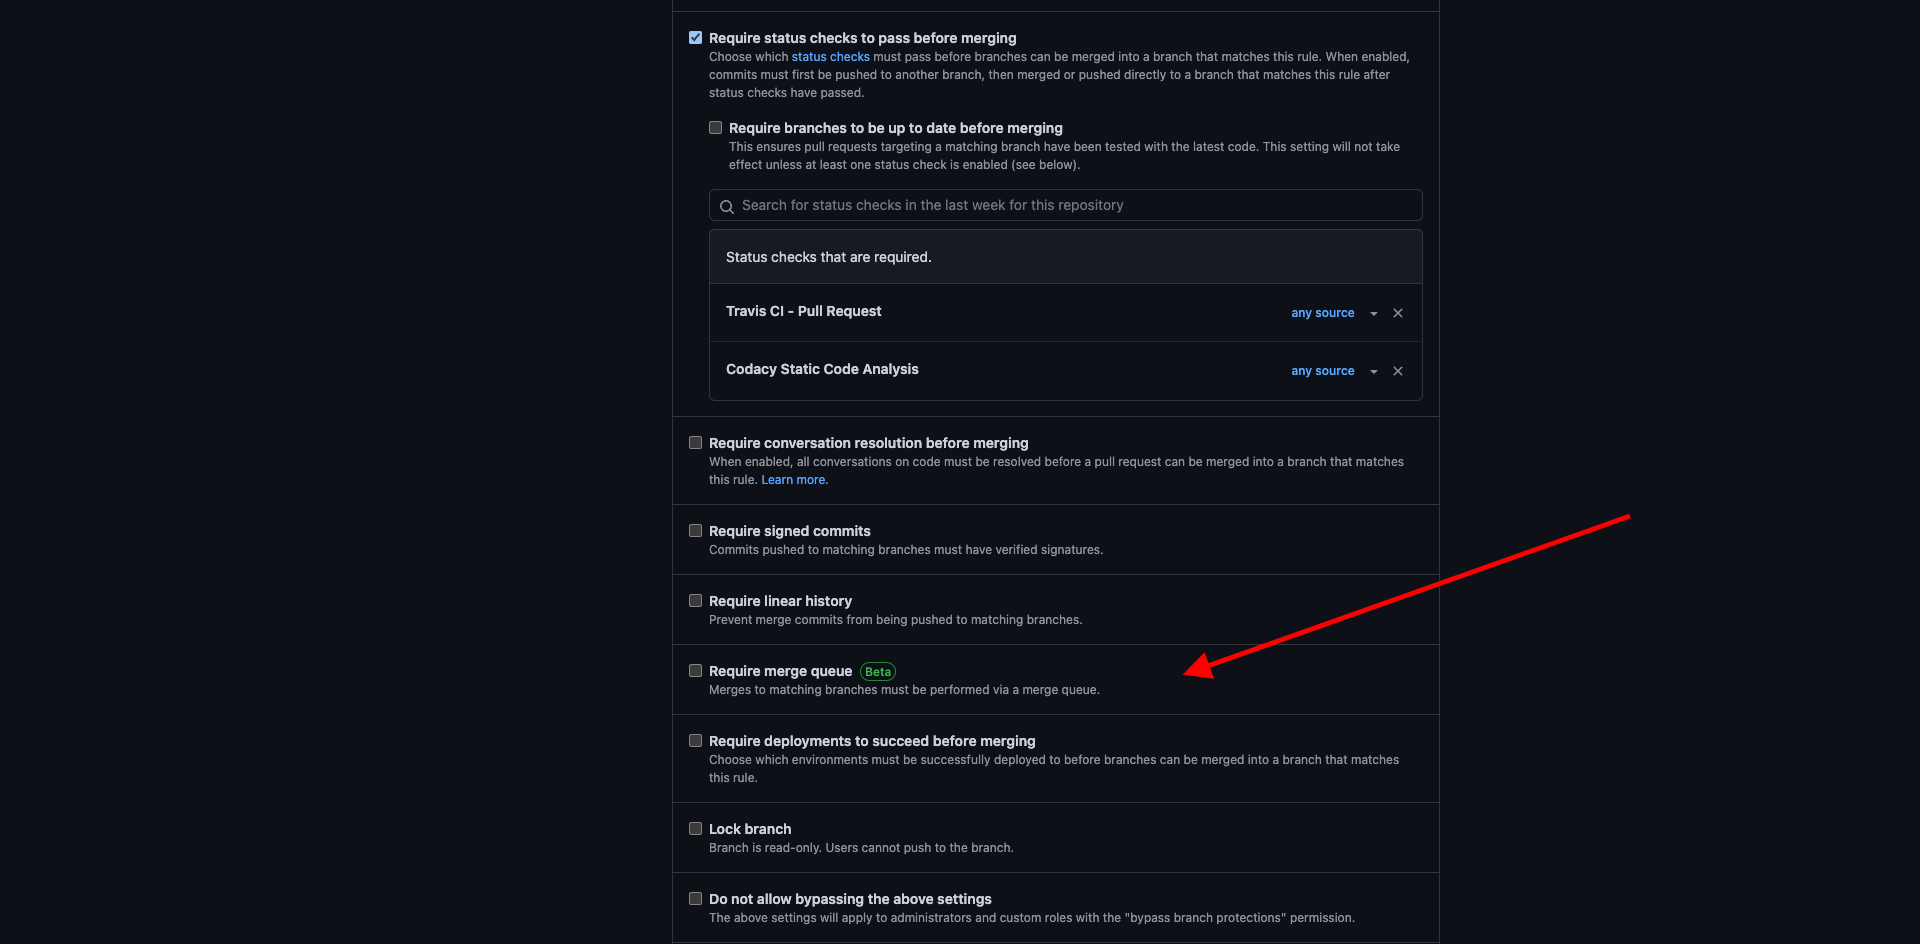 ICYMI: Github is testing queued merges for busy repositories